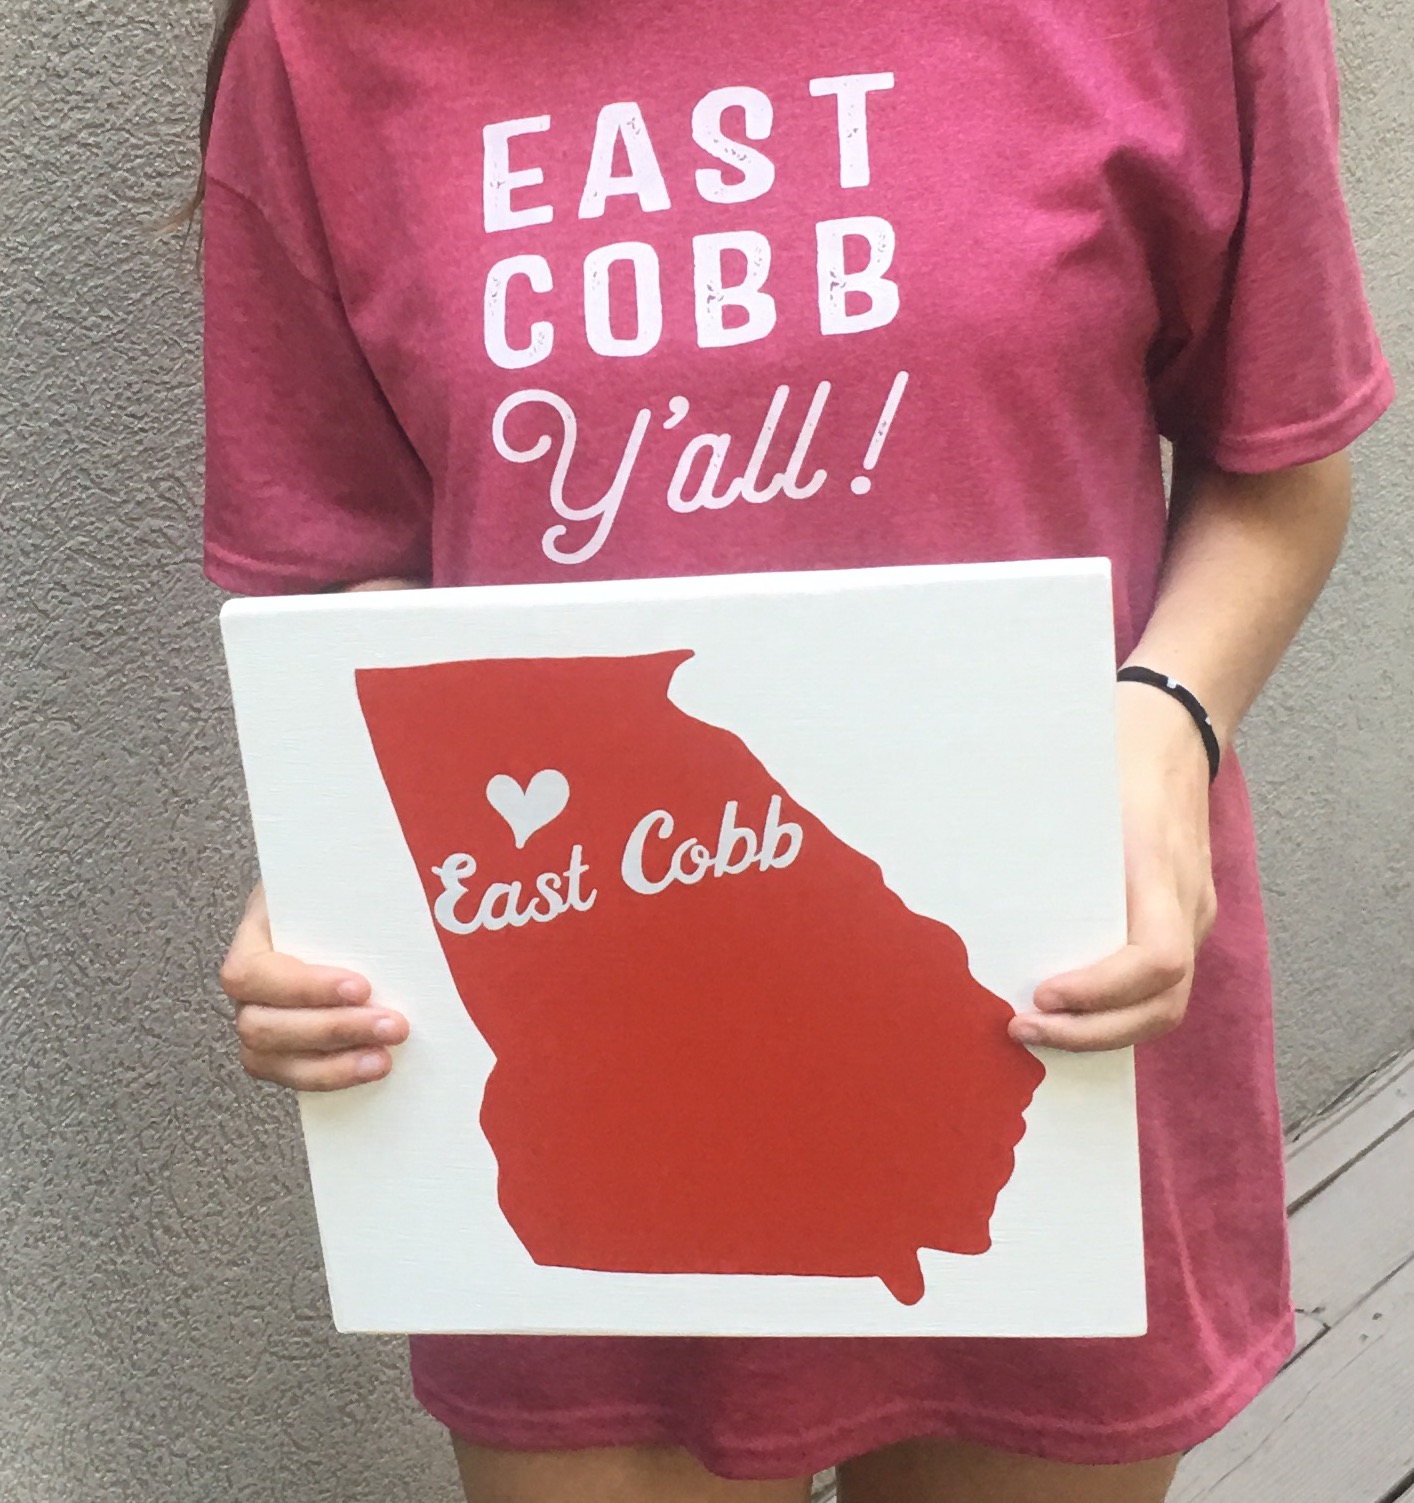 Facebook Friday Freebie!  Enter to Win an East Cobb “Fan Pack”!!!